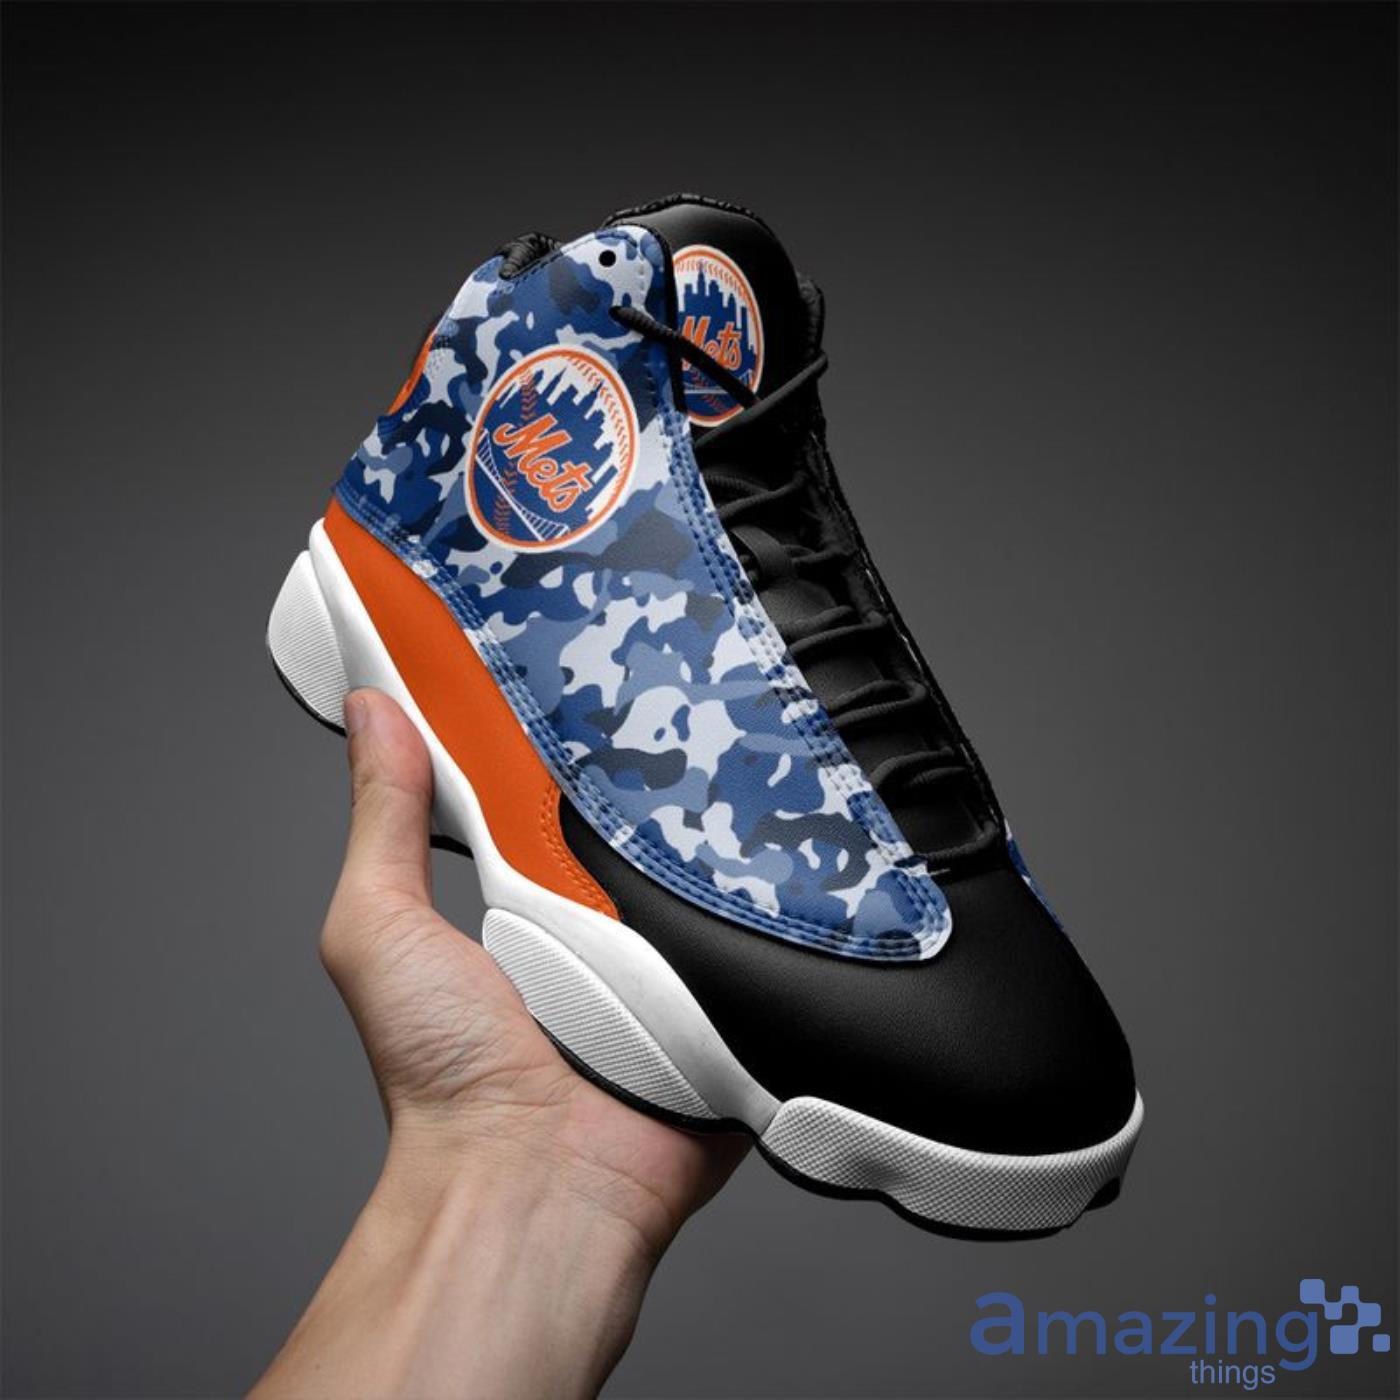 Customized Name New York Mets Jordan 13 Personalized Shoes Release -  Banantees